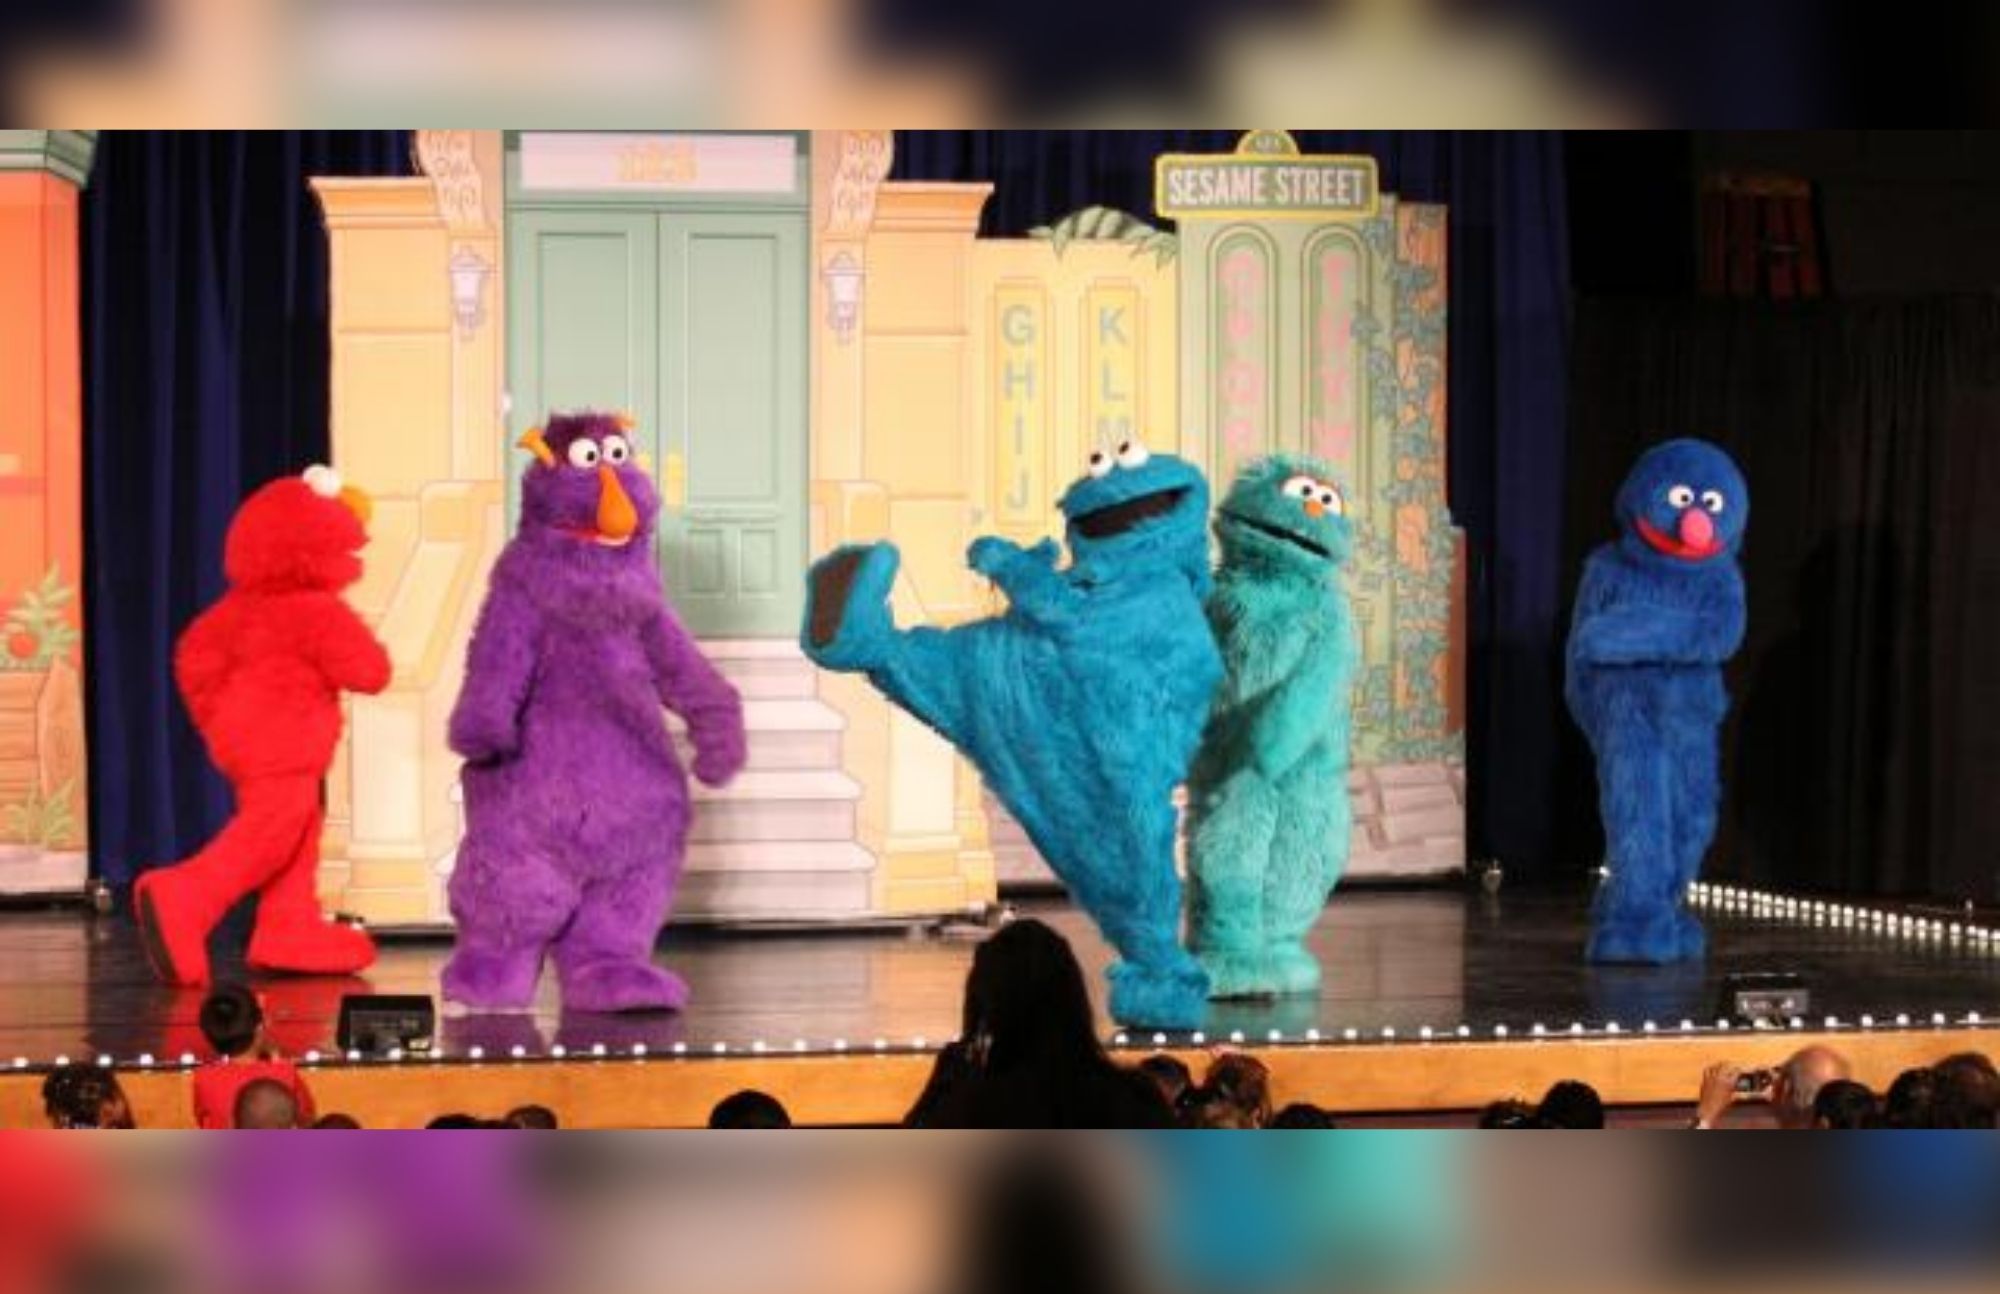 Five muppets with different colors are performing in the stage in front of many people